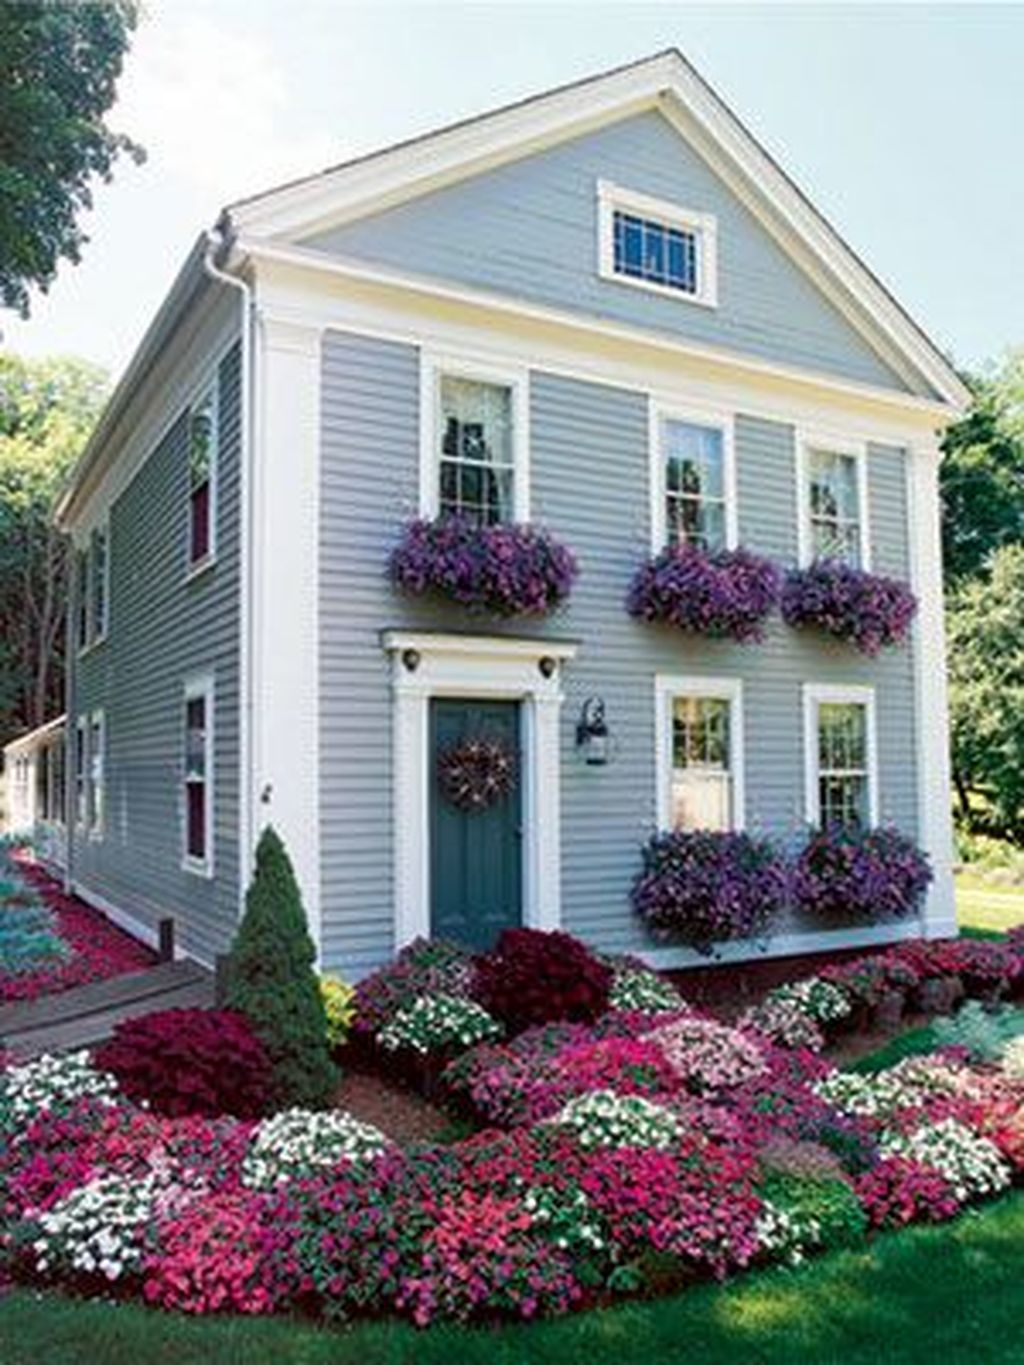 Amazing Windows Flower Boxes Design Ideas Must See22